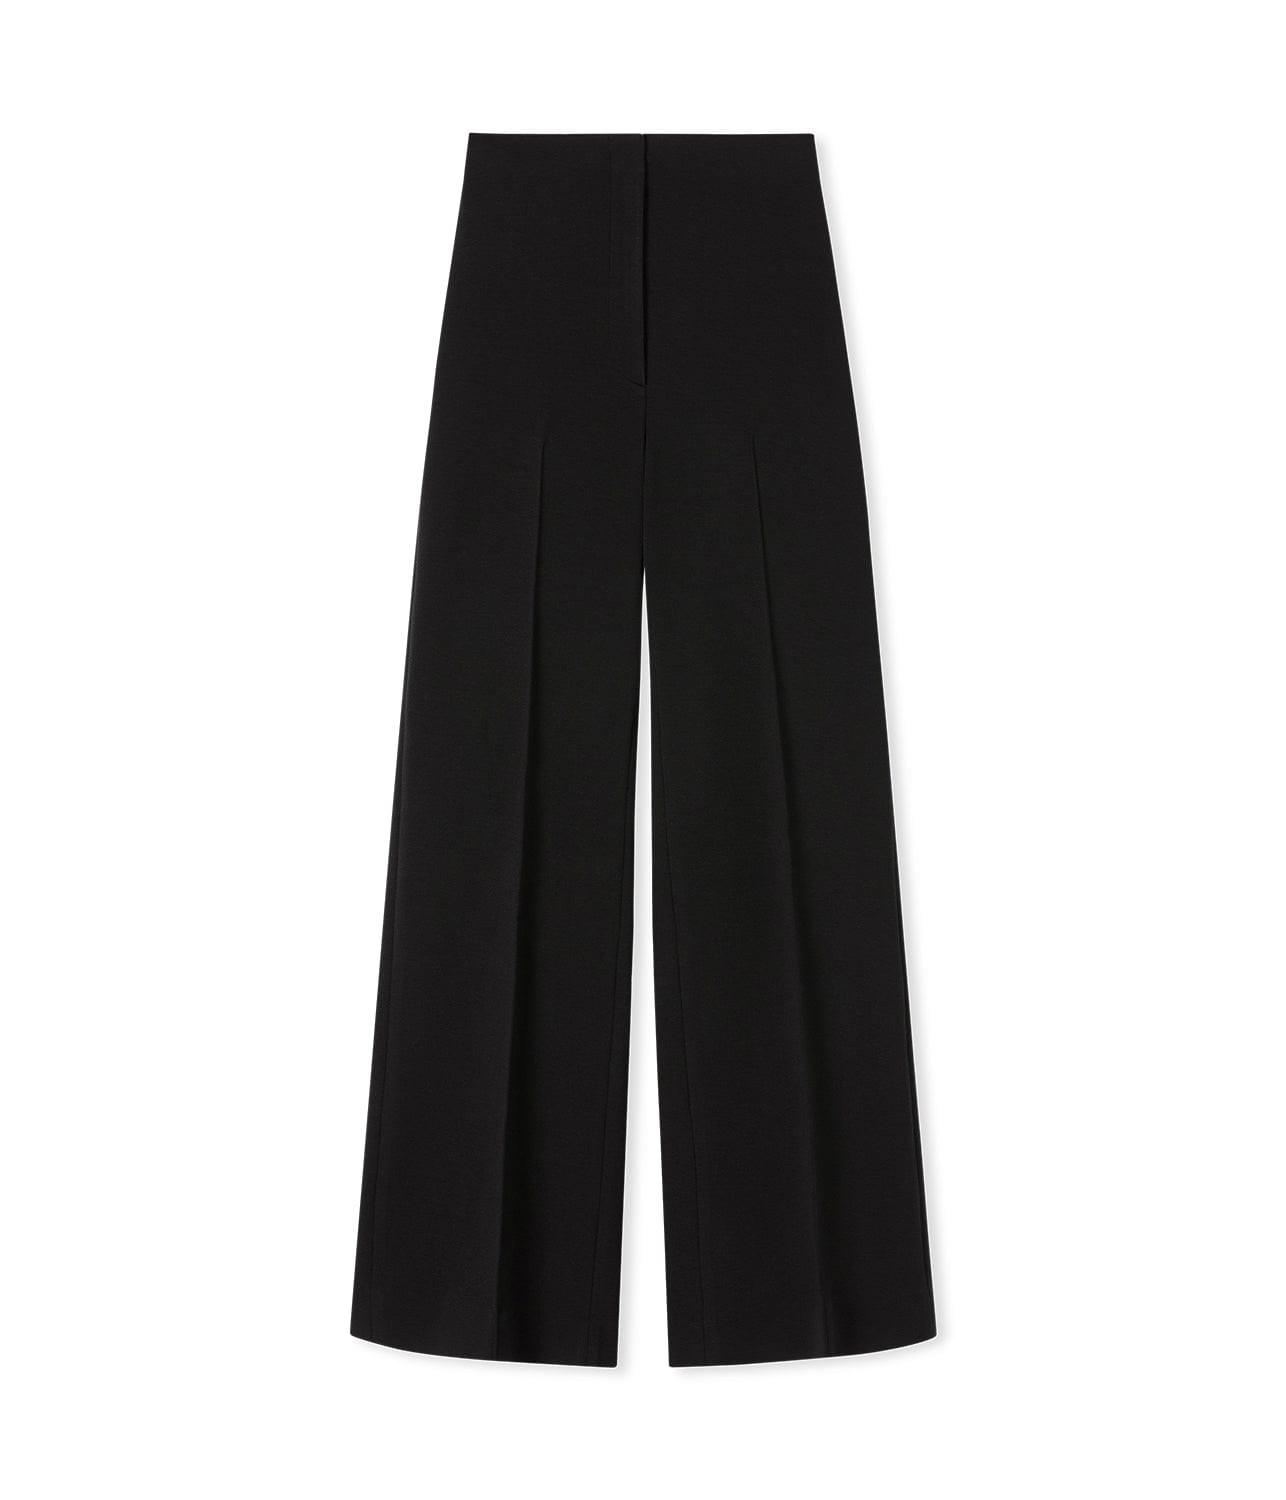 THE RAY PANT- BLACK | A.EMERY |  A.EMERY THE RAY PANT- BLACK